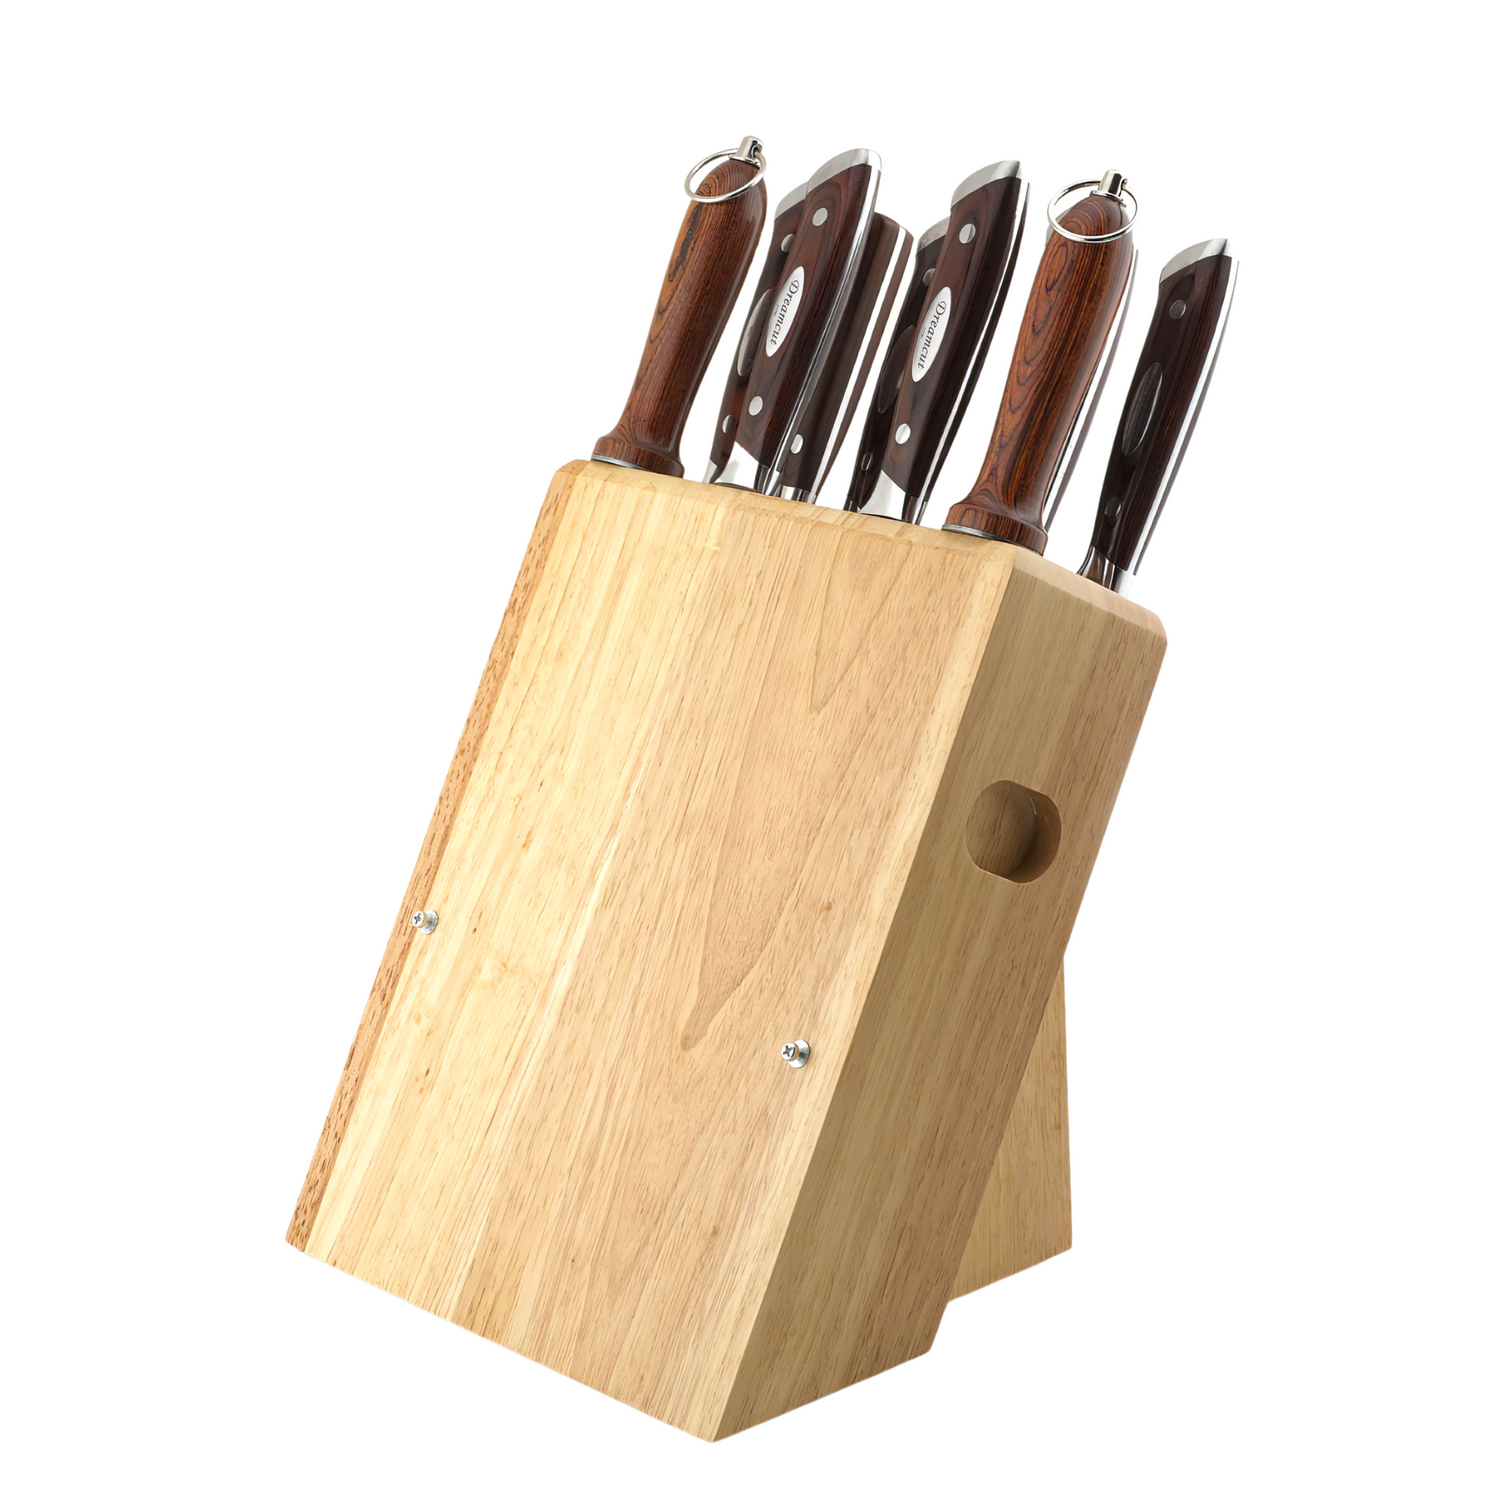 Easter Sale ! - 12 pc Set sale- order today and get a free bonus knife